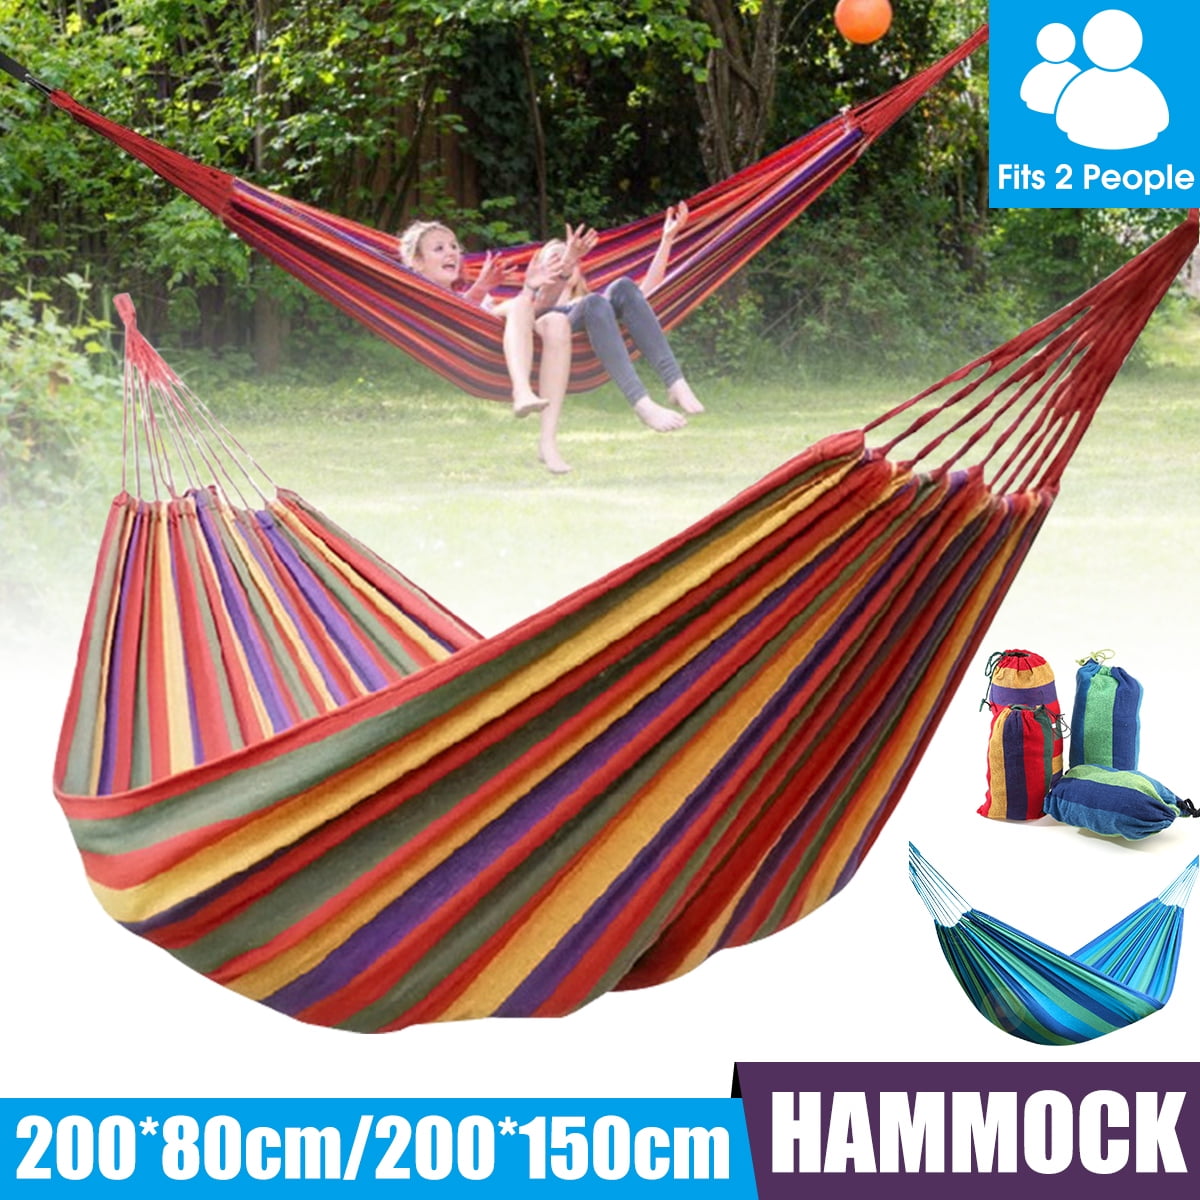 Camping Hammock,Single Portable Hammock Nylon Parachute with 2 Tree Straps,Ultra-Lightweight Suitable for Outdoor,Indoor,Camping,Hiking,Backpacking,Beach 